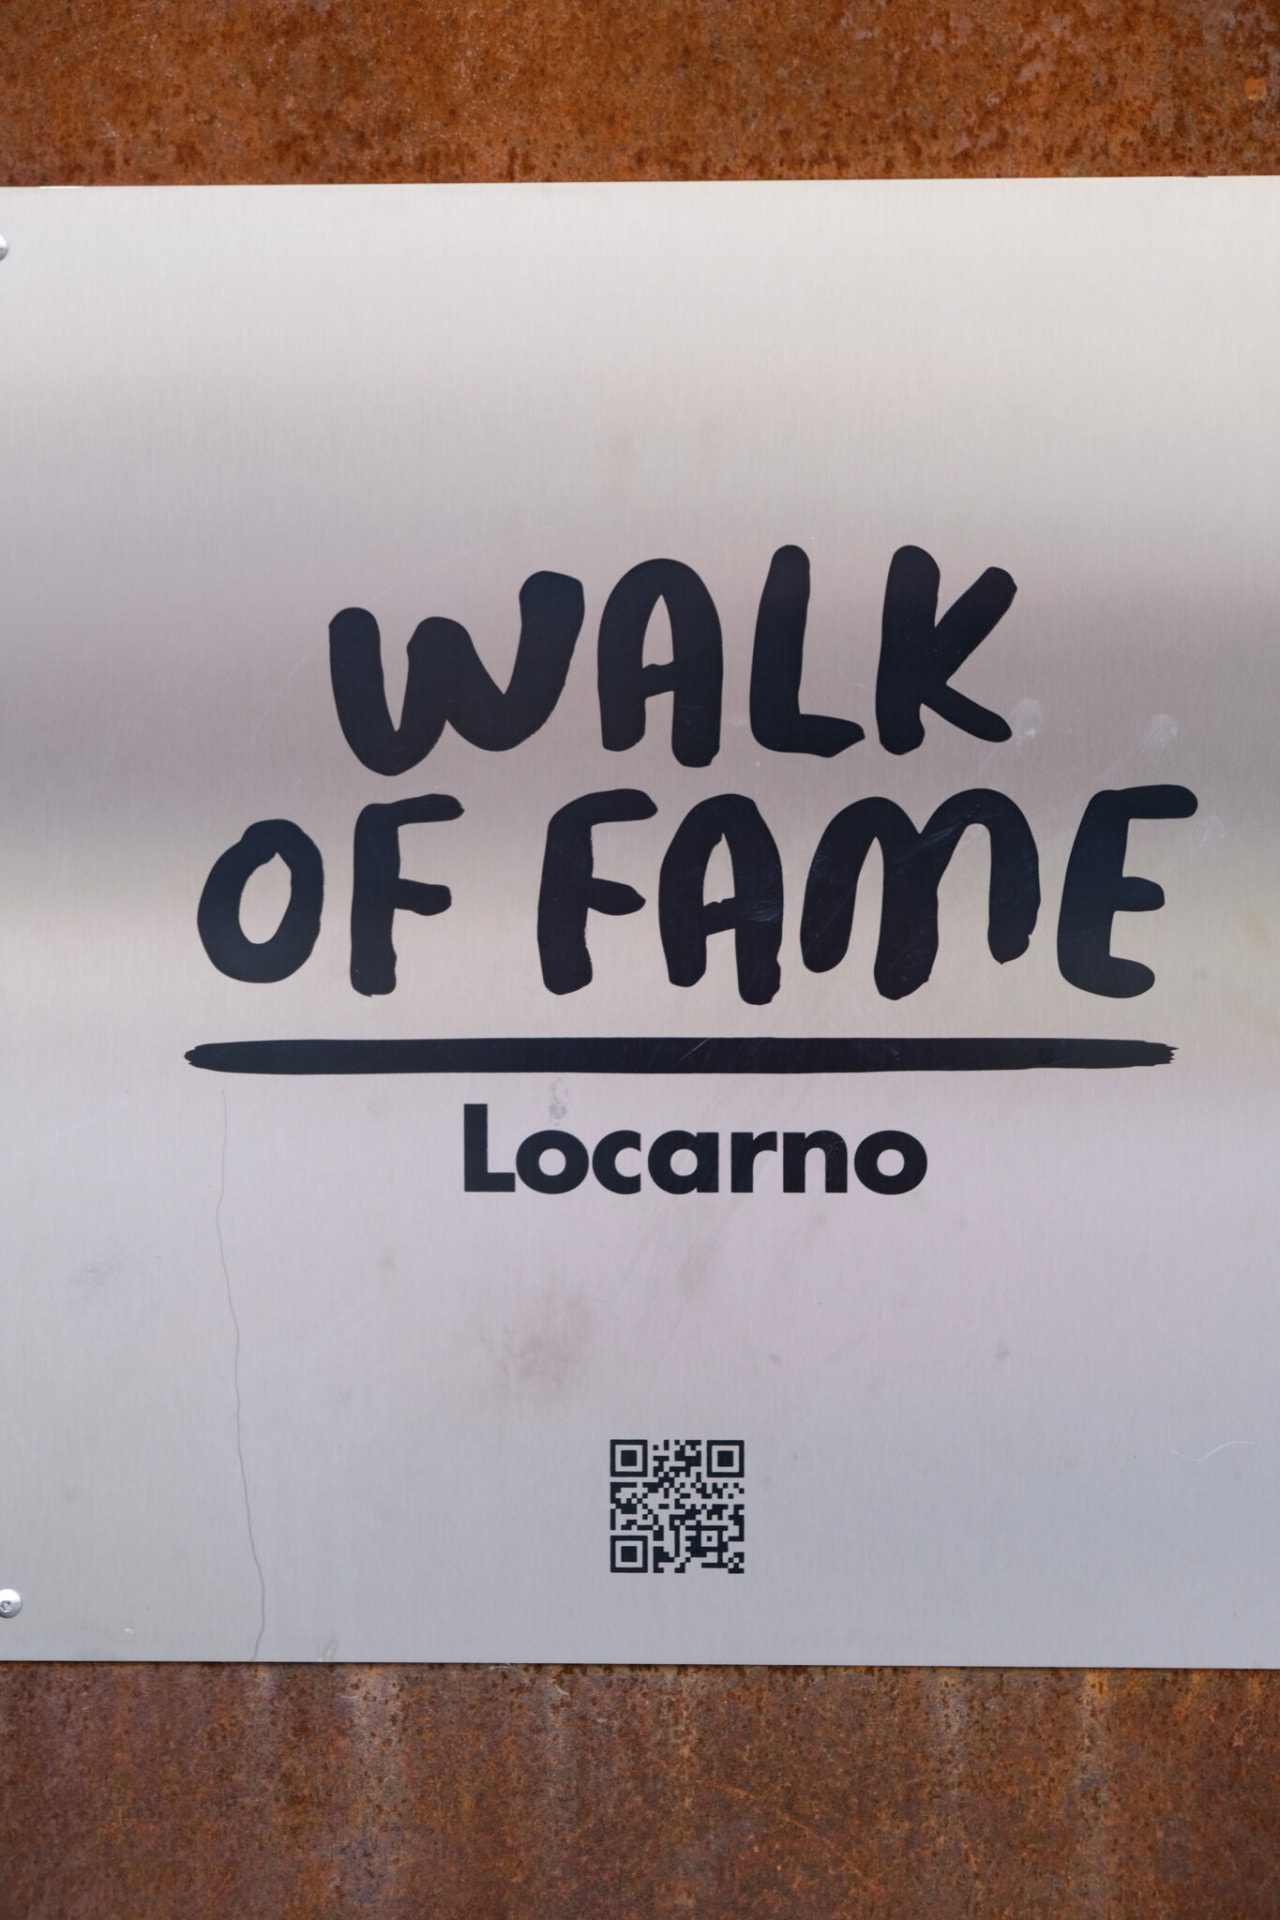 Sign on which Walk Of Fame Locarno is written